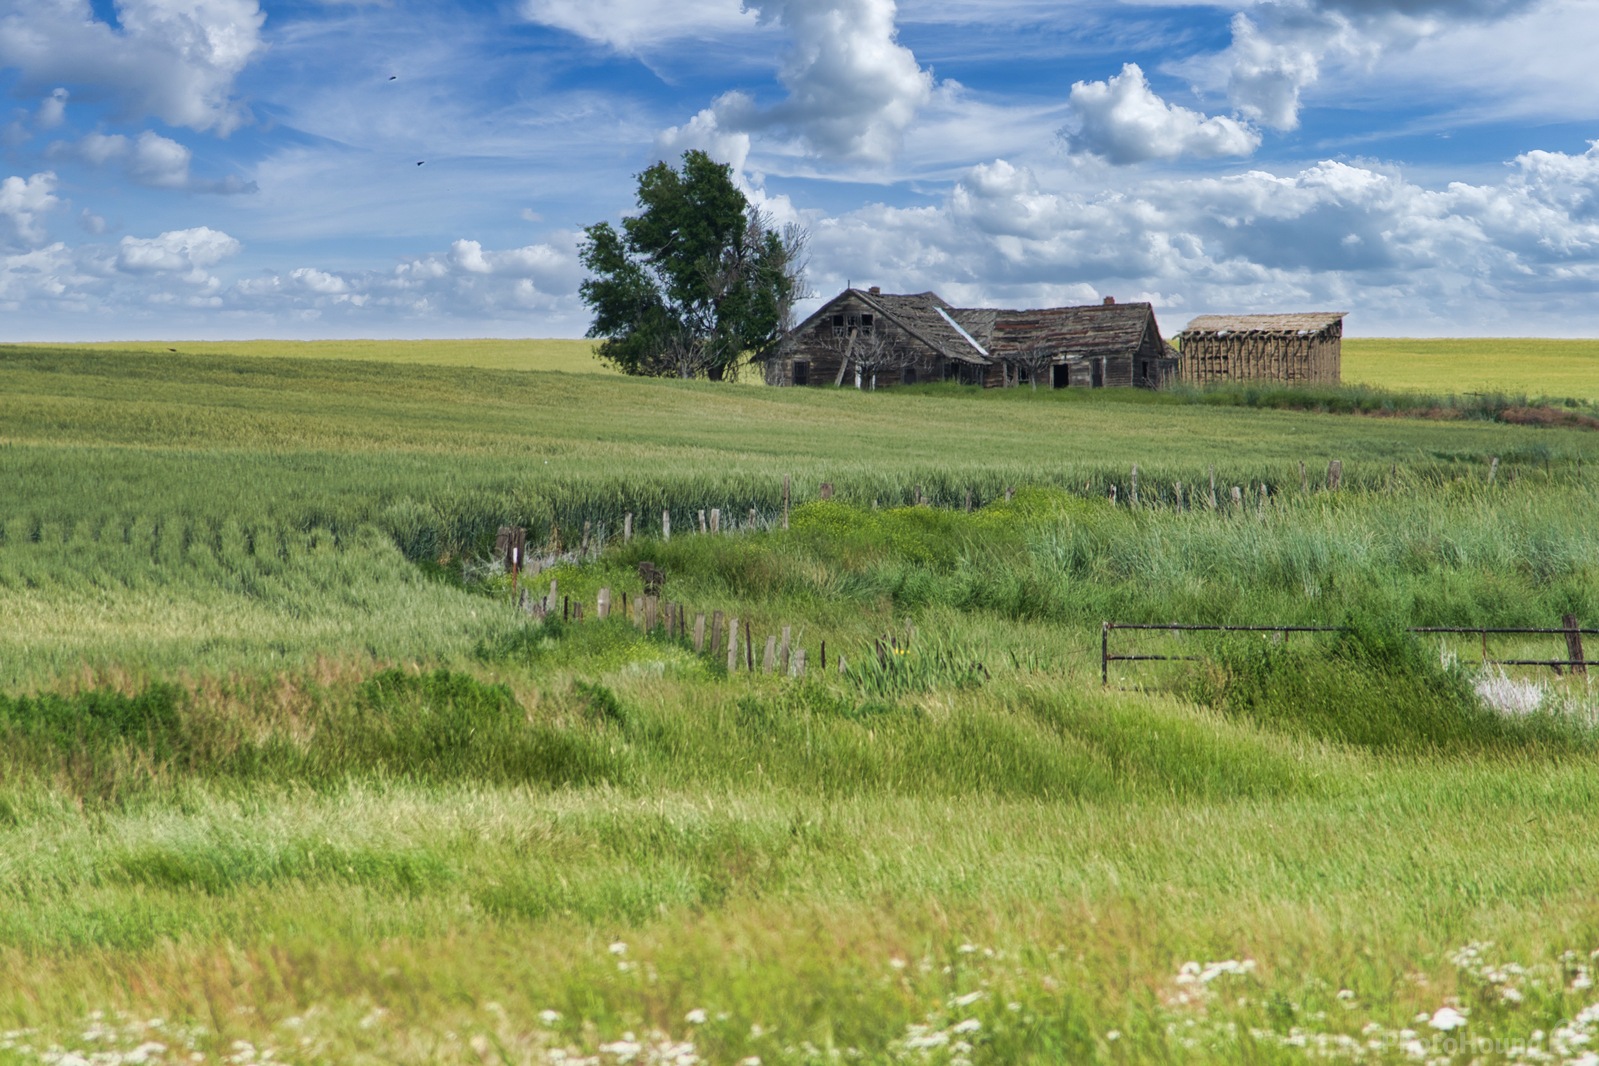 Image of Grant County Homestead by Steve West